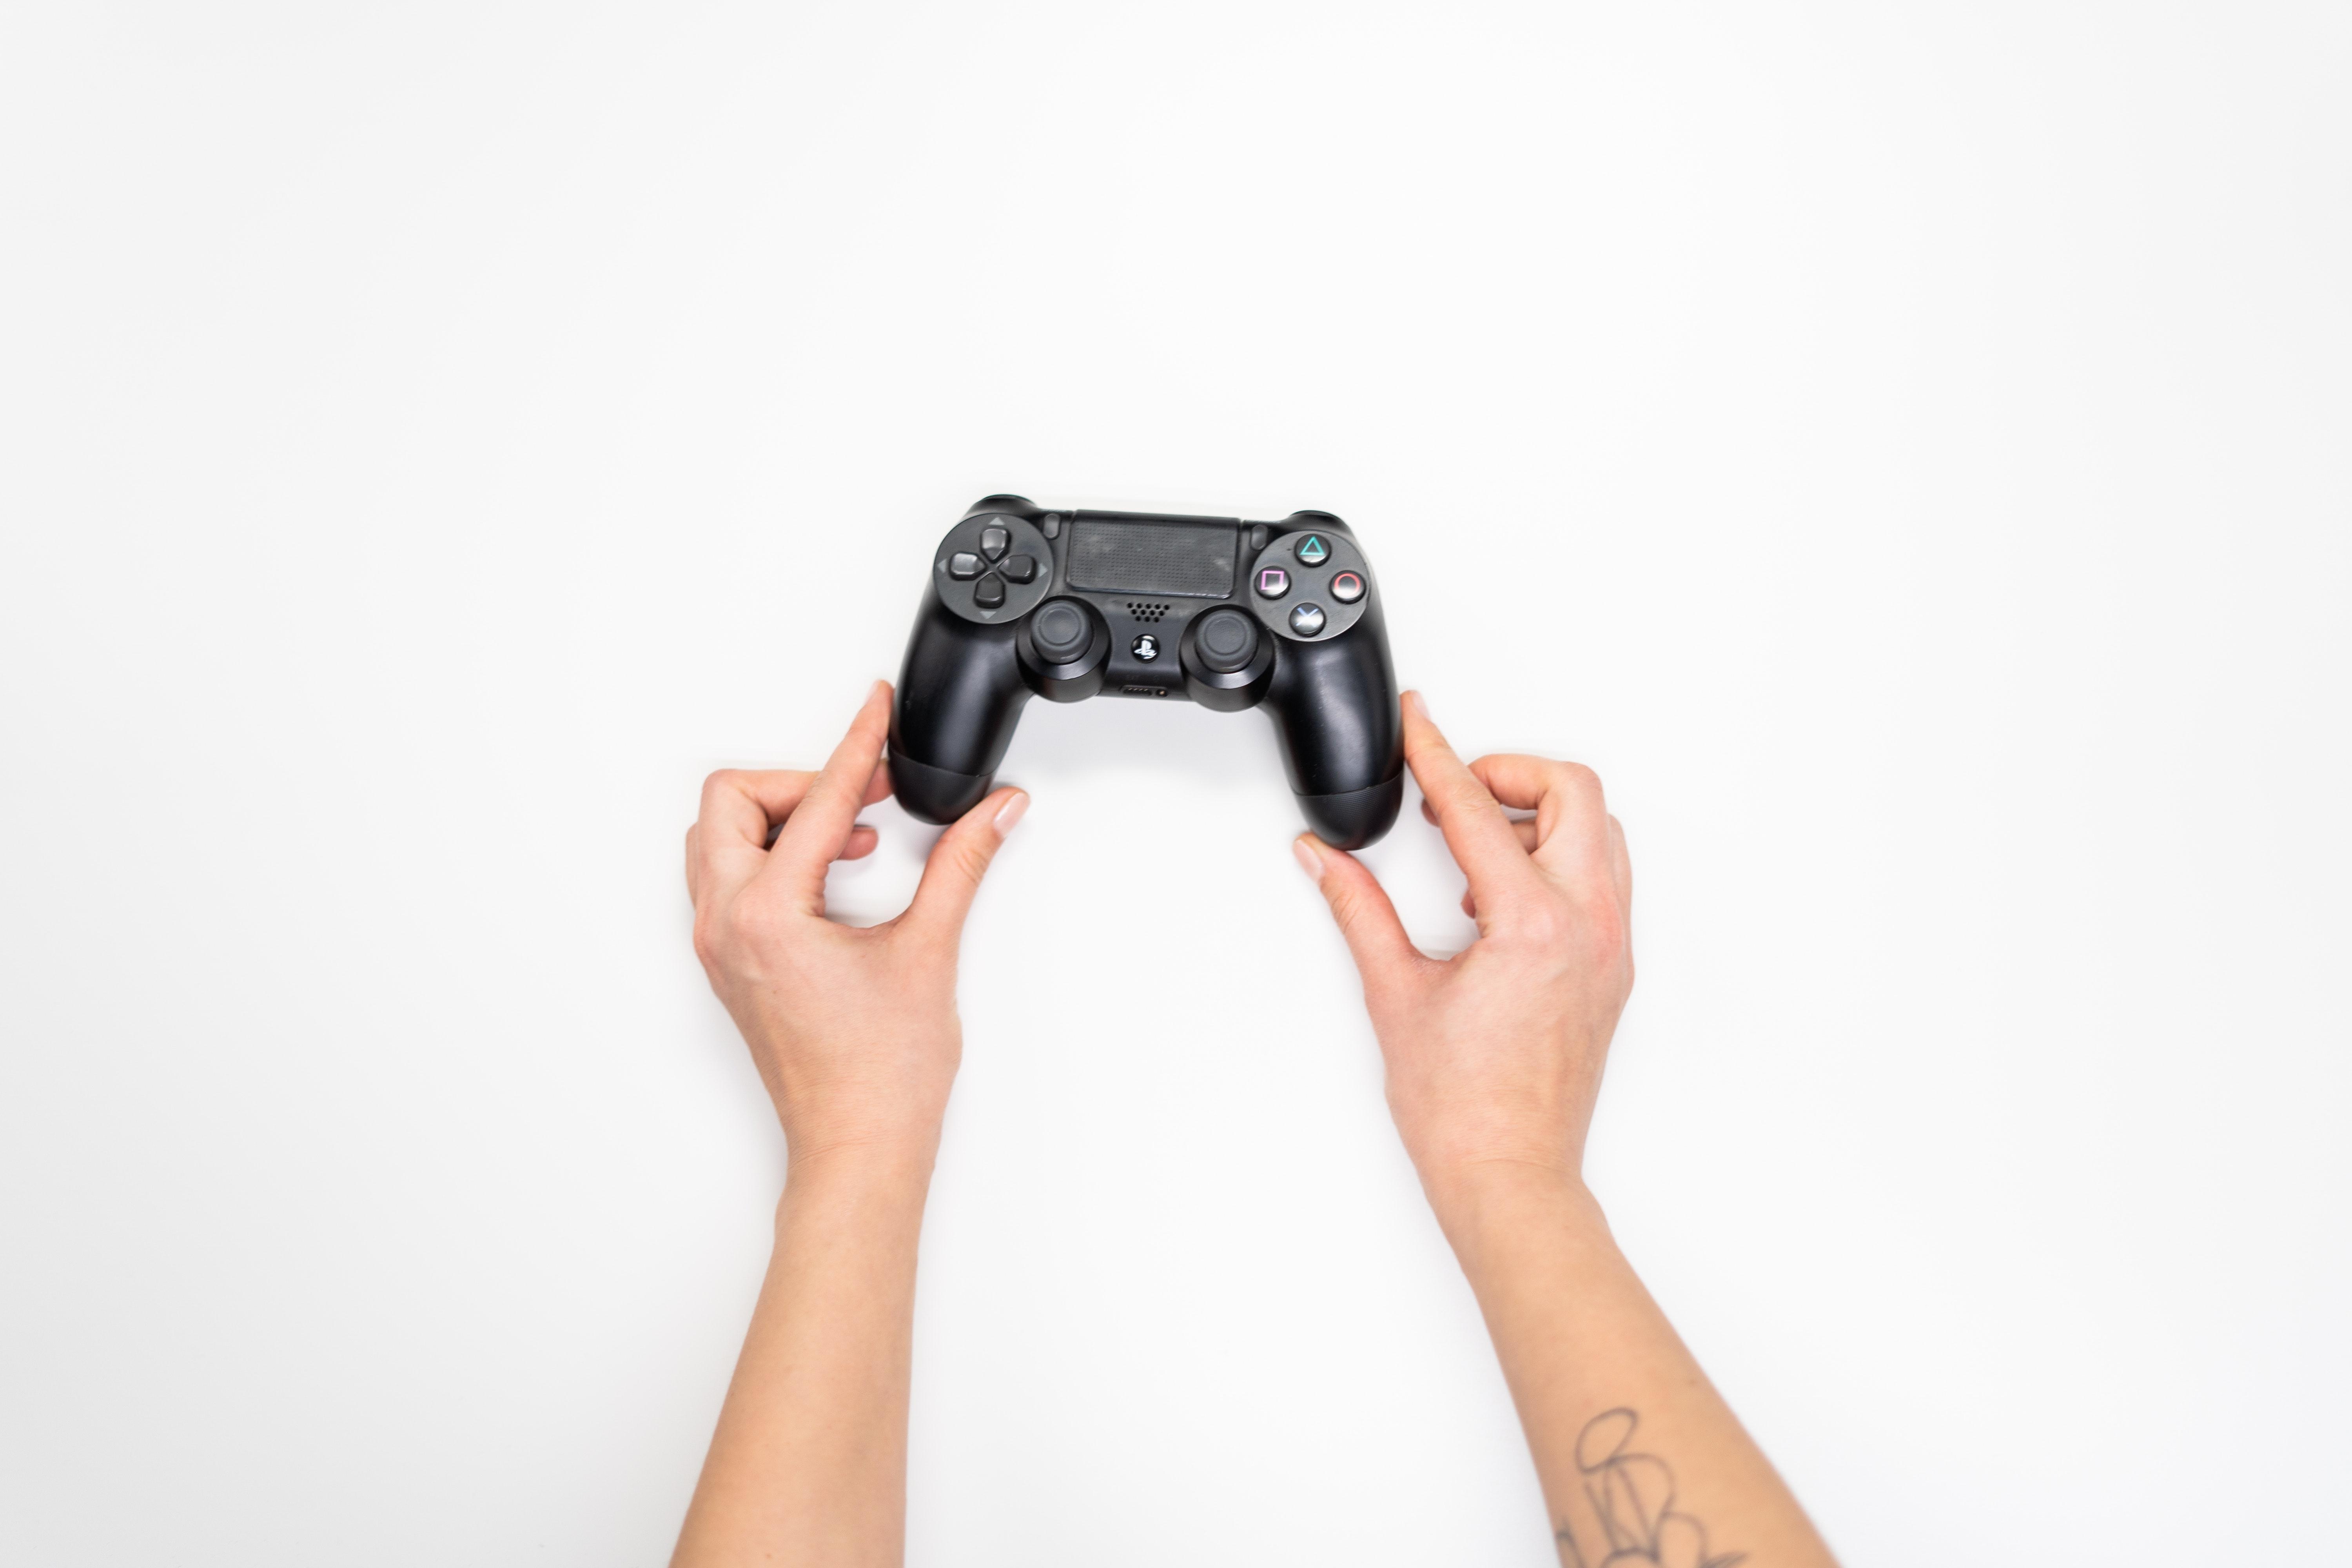 Can USB-C fit PS4 controller?